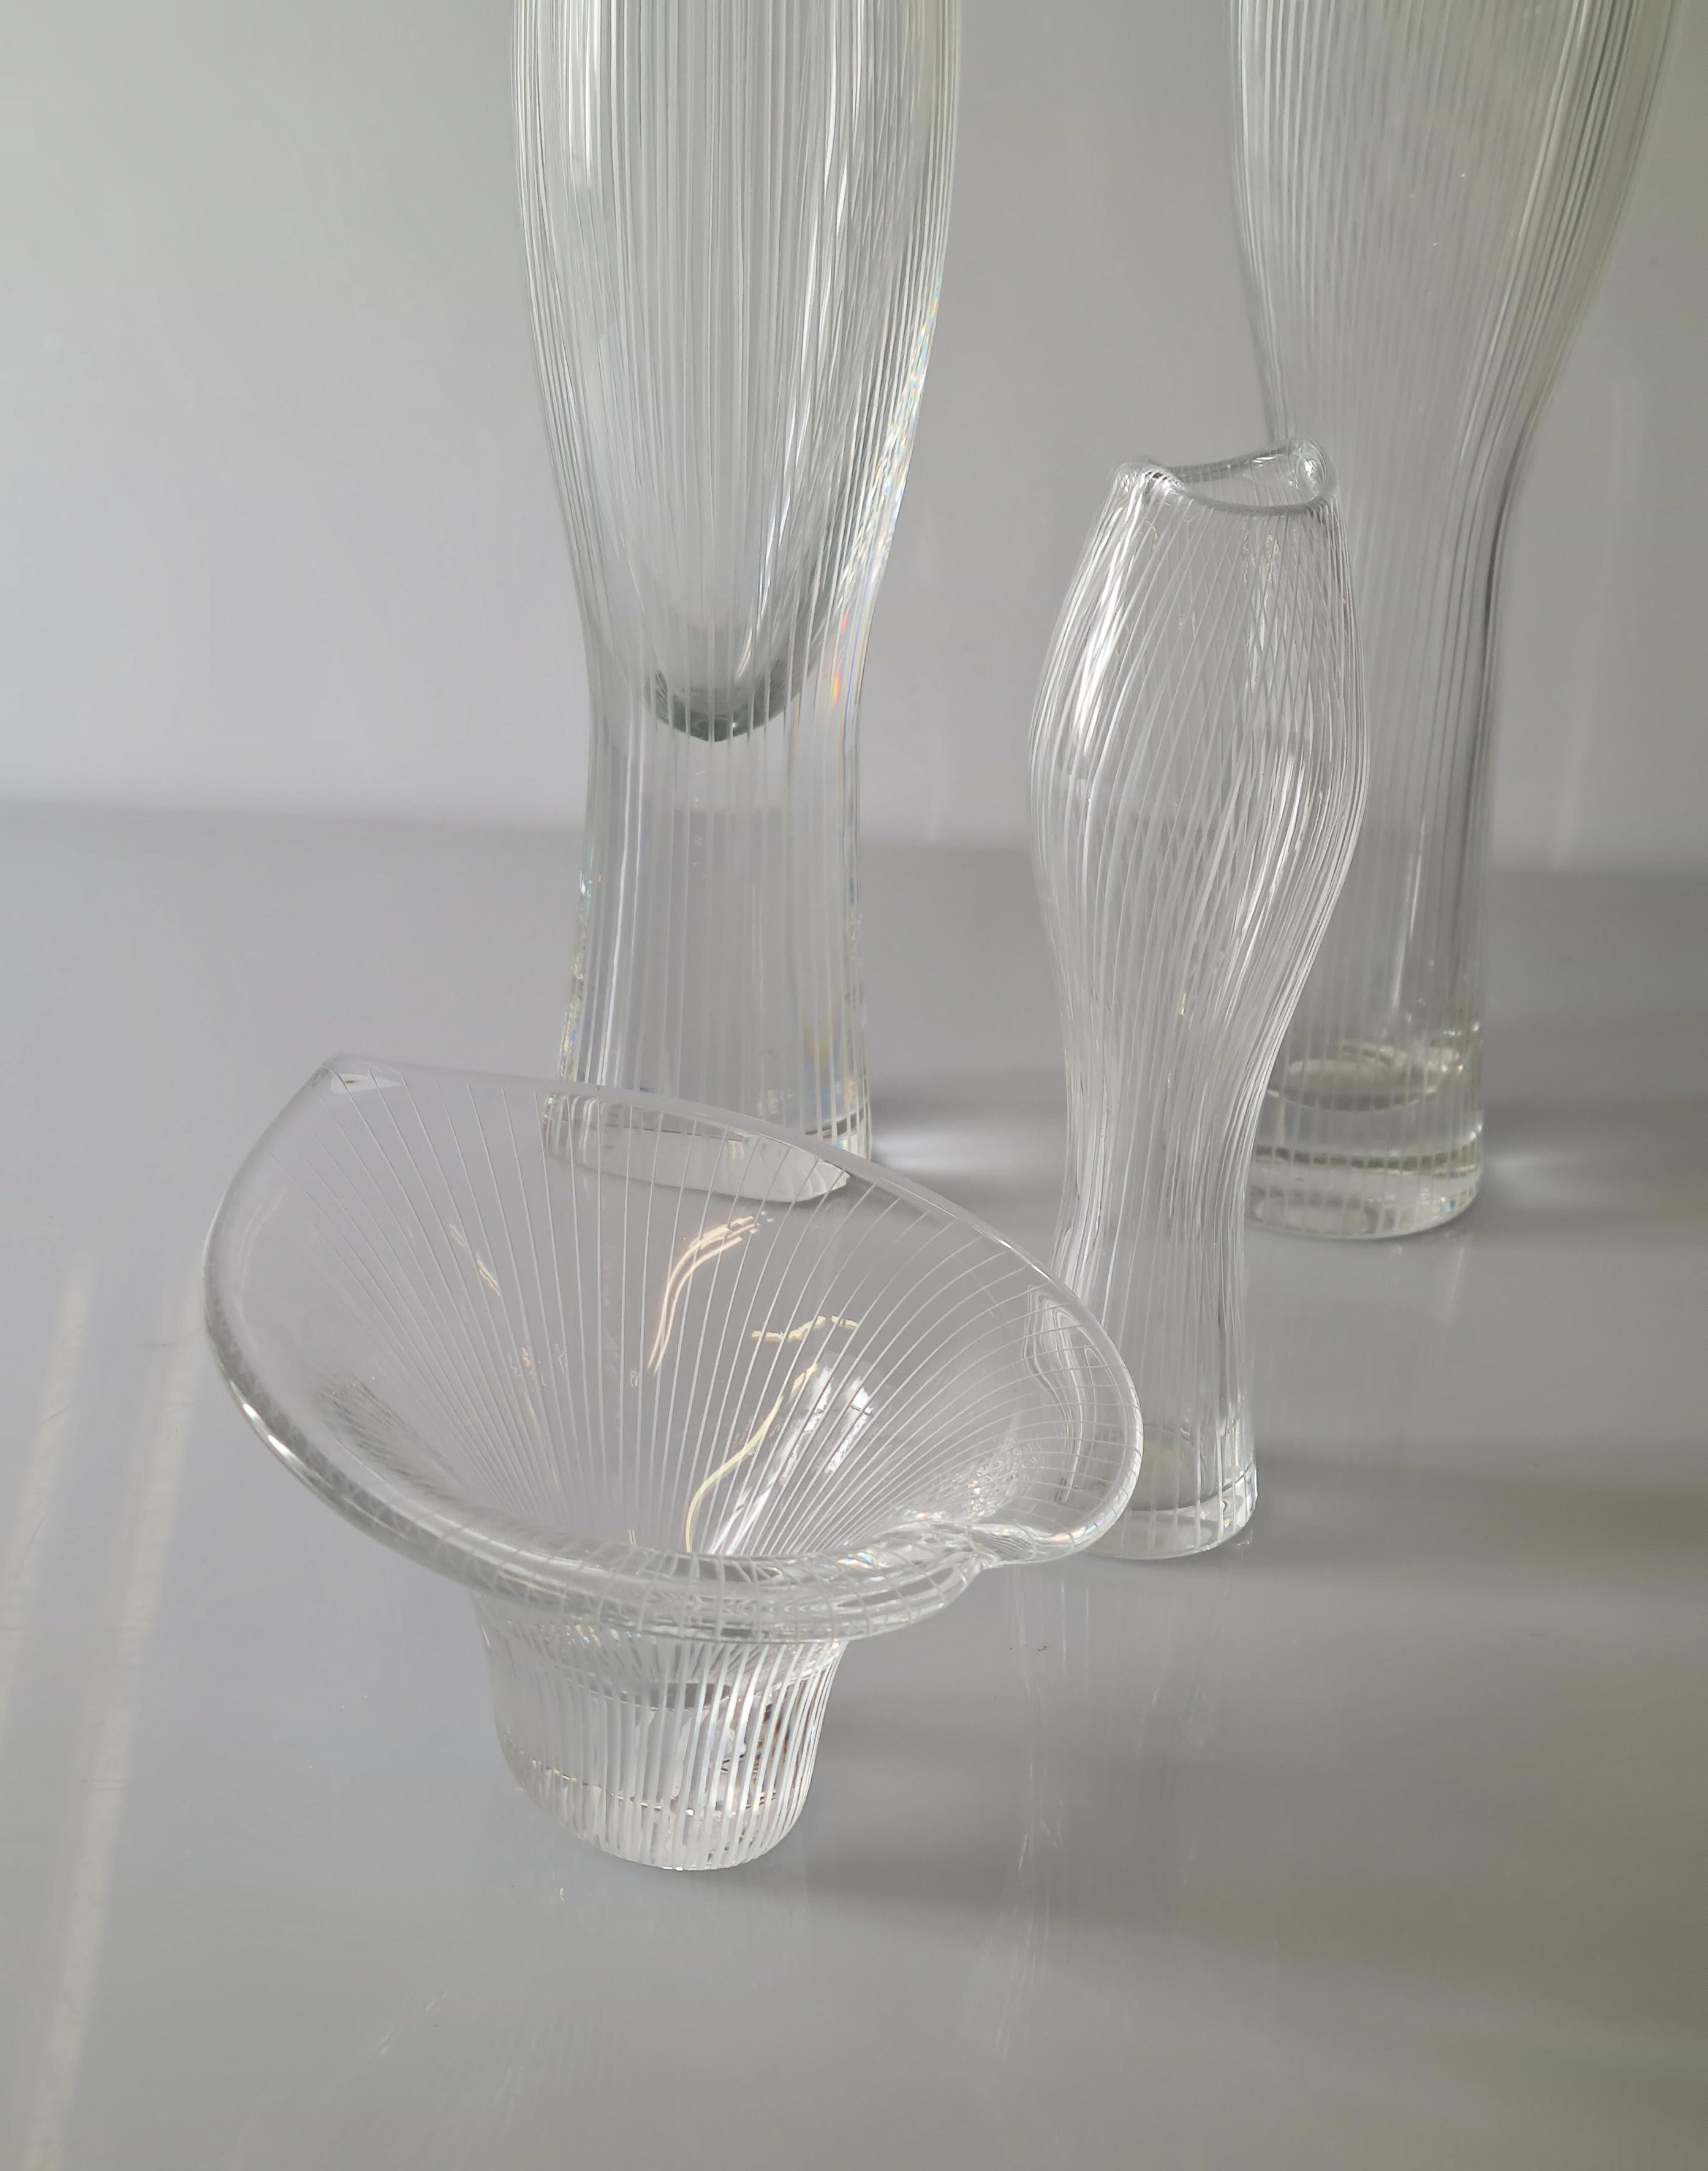 Finnish A Variety of Art Glass Objects by Tapio Wirkkala for Iittala, 1950s For Sale